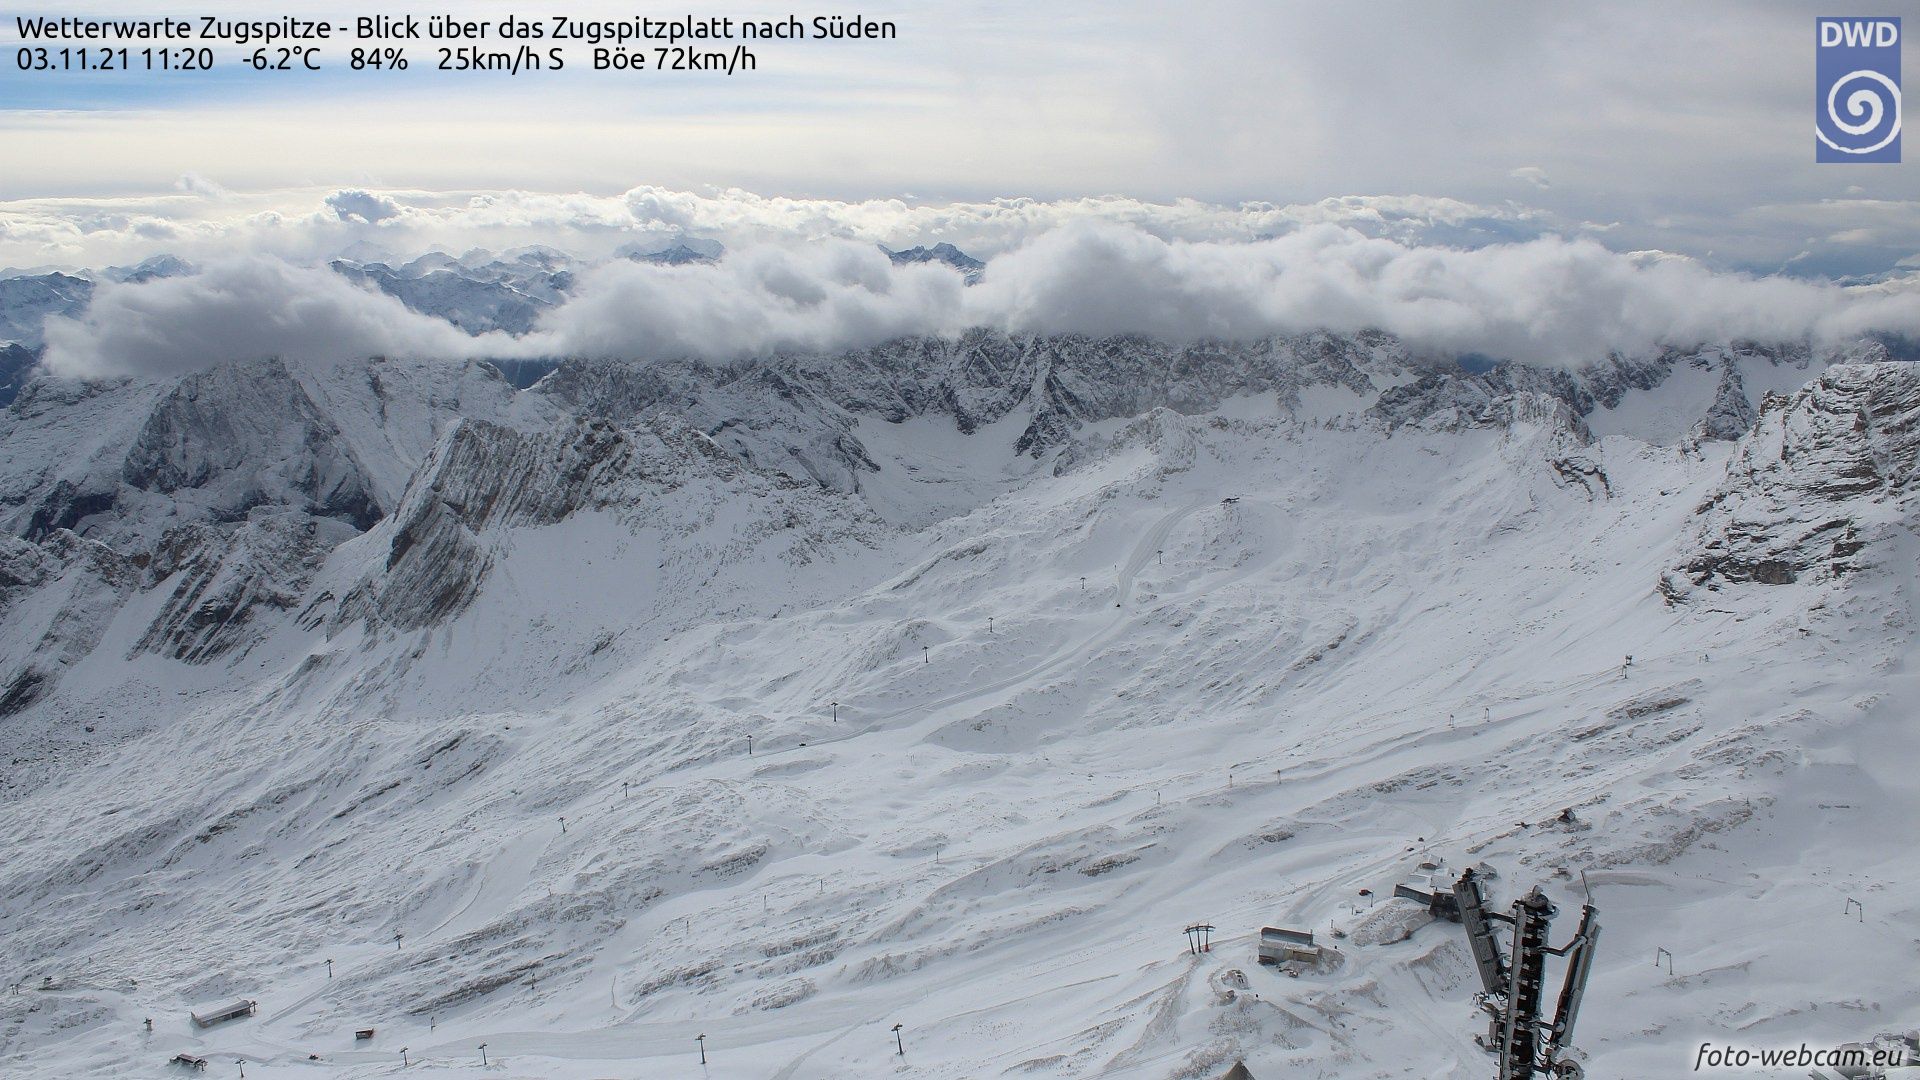 Clearing in the Northern Alps due to temporary Südföhn (foto-webcam.eu)